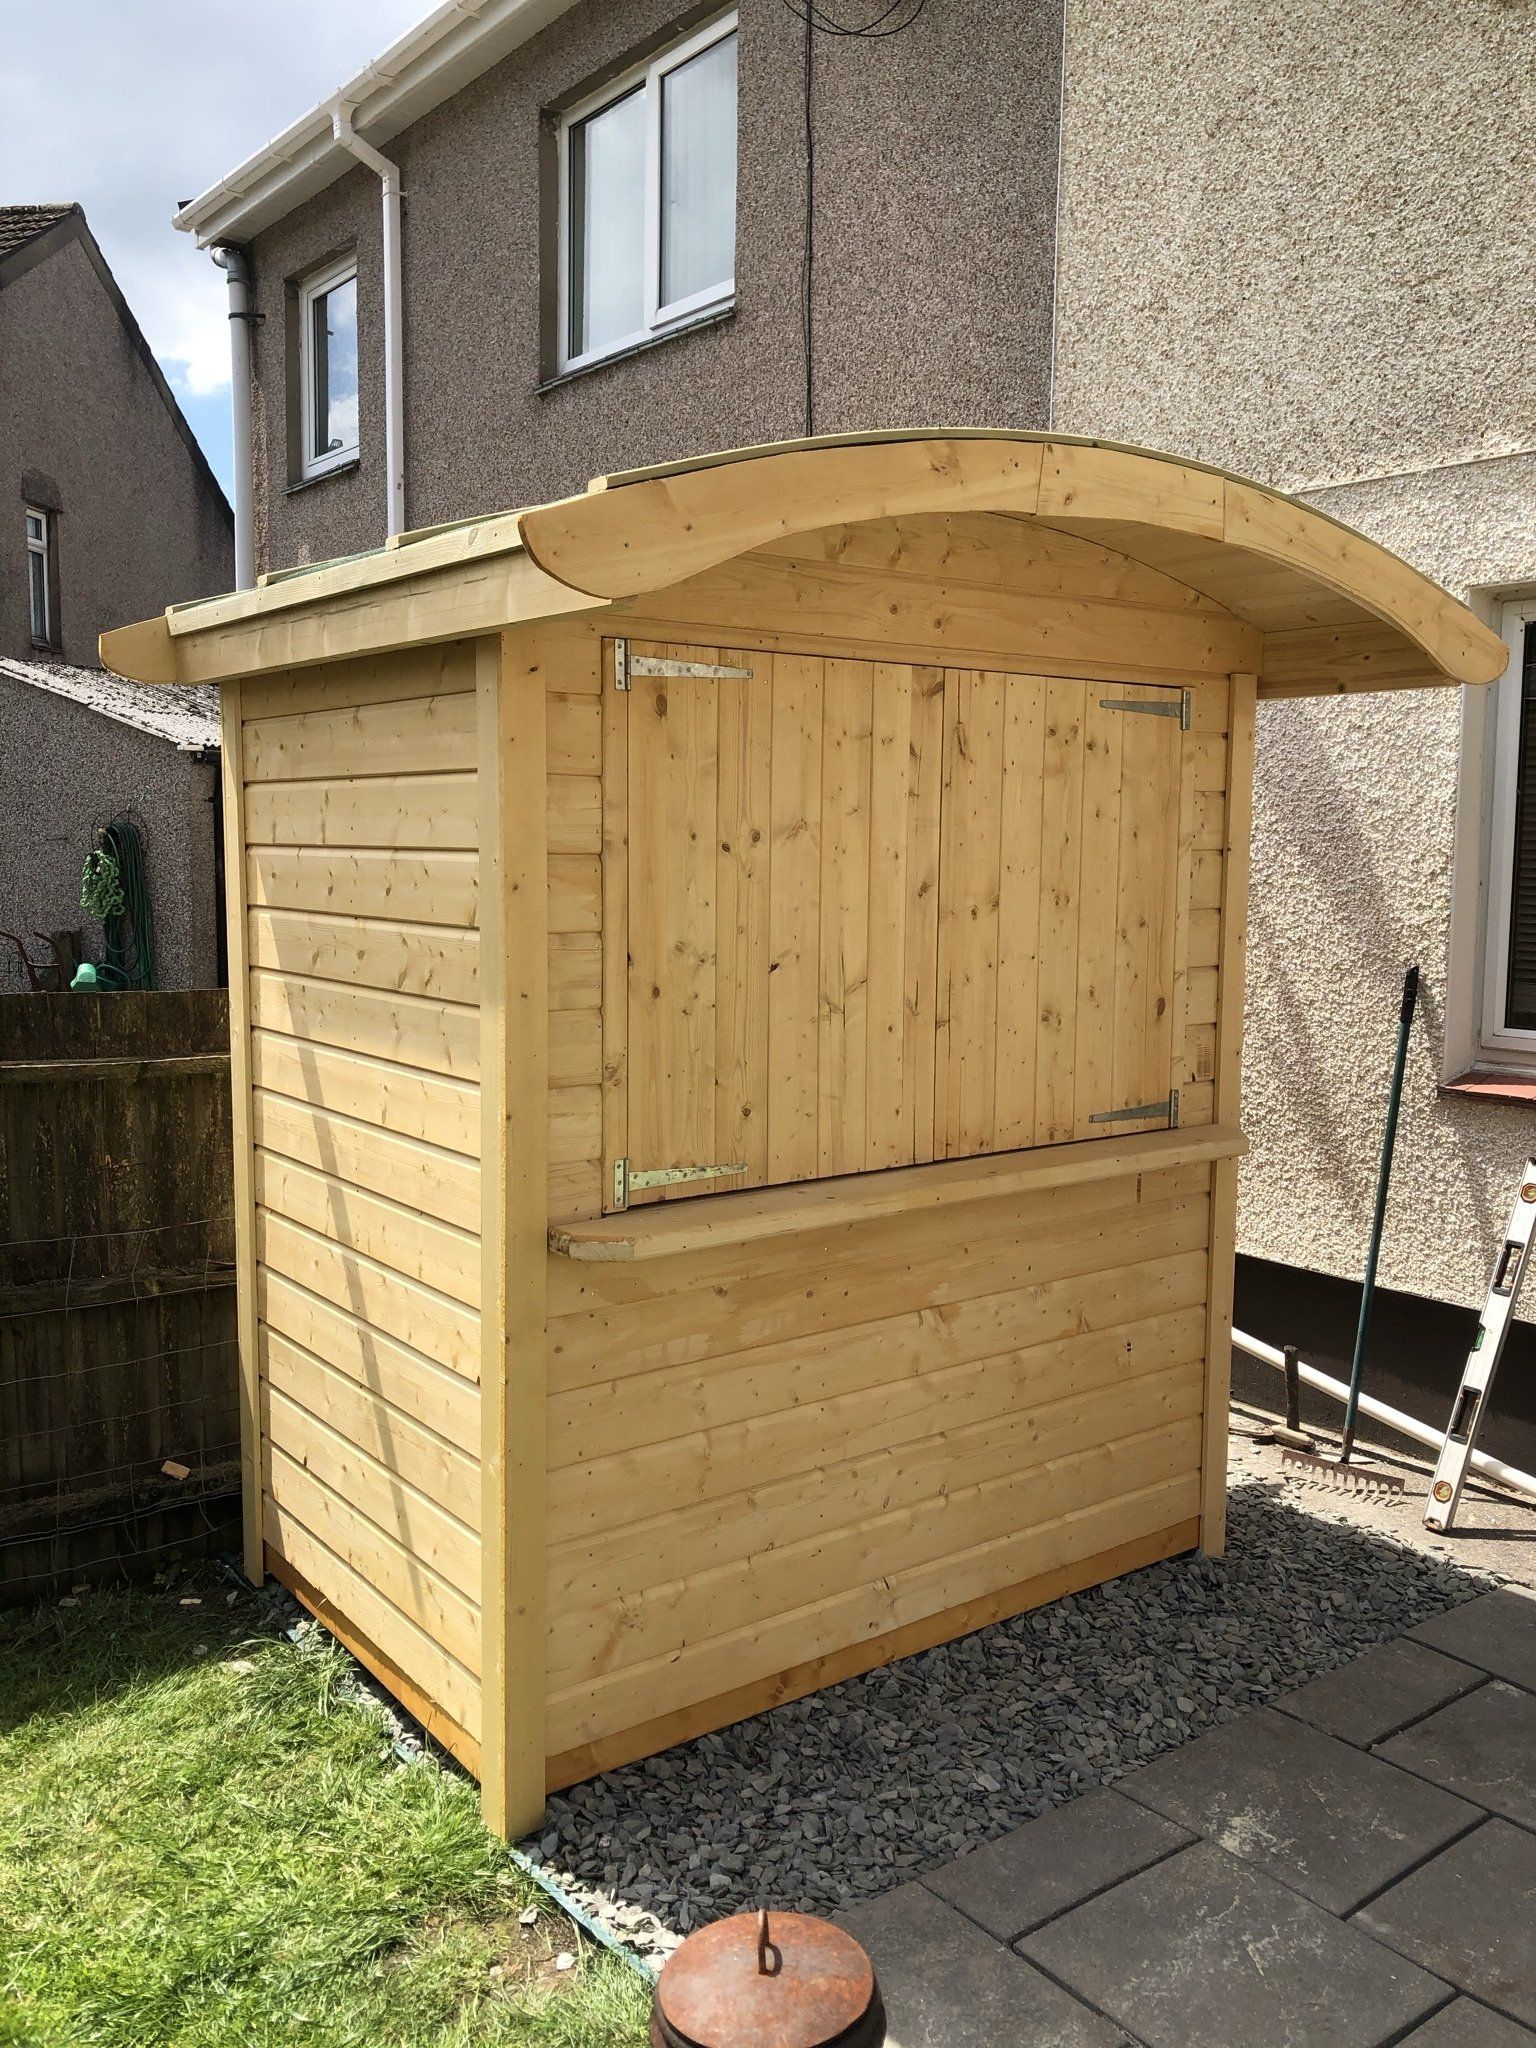 6' x 4' Curved roof bar with the doors shut.